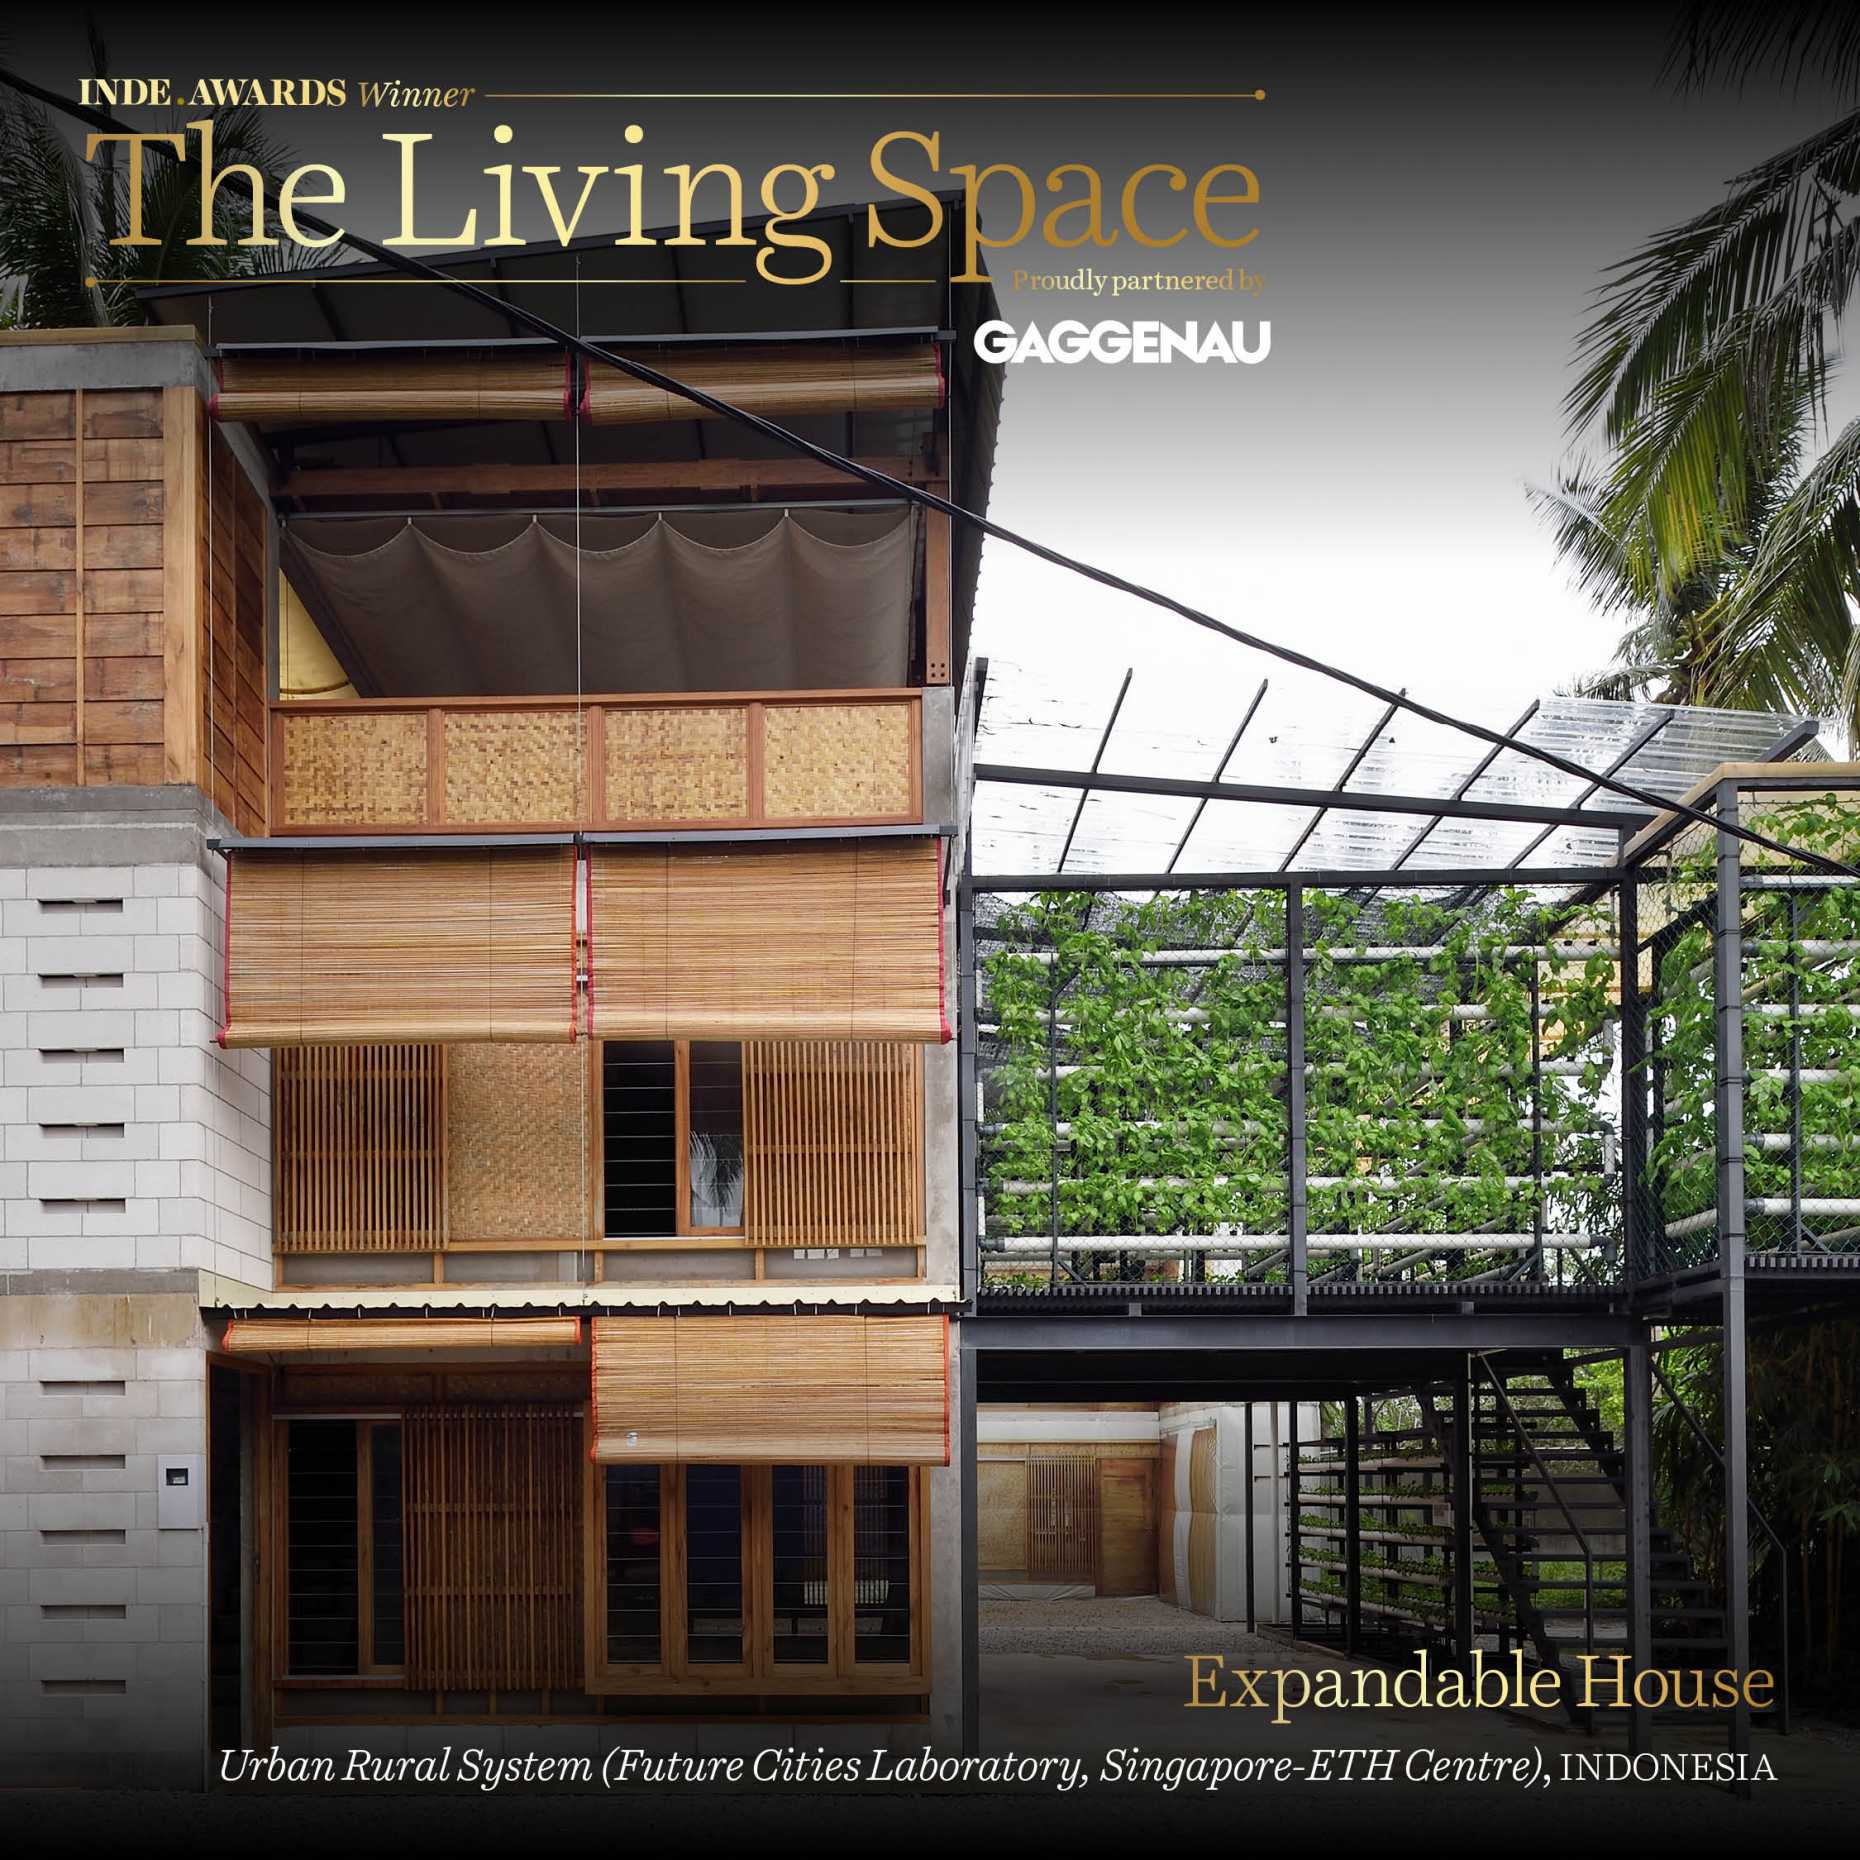 FCL Urban-Rural System's Expandable House